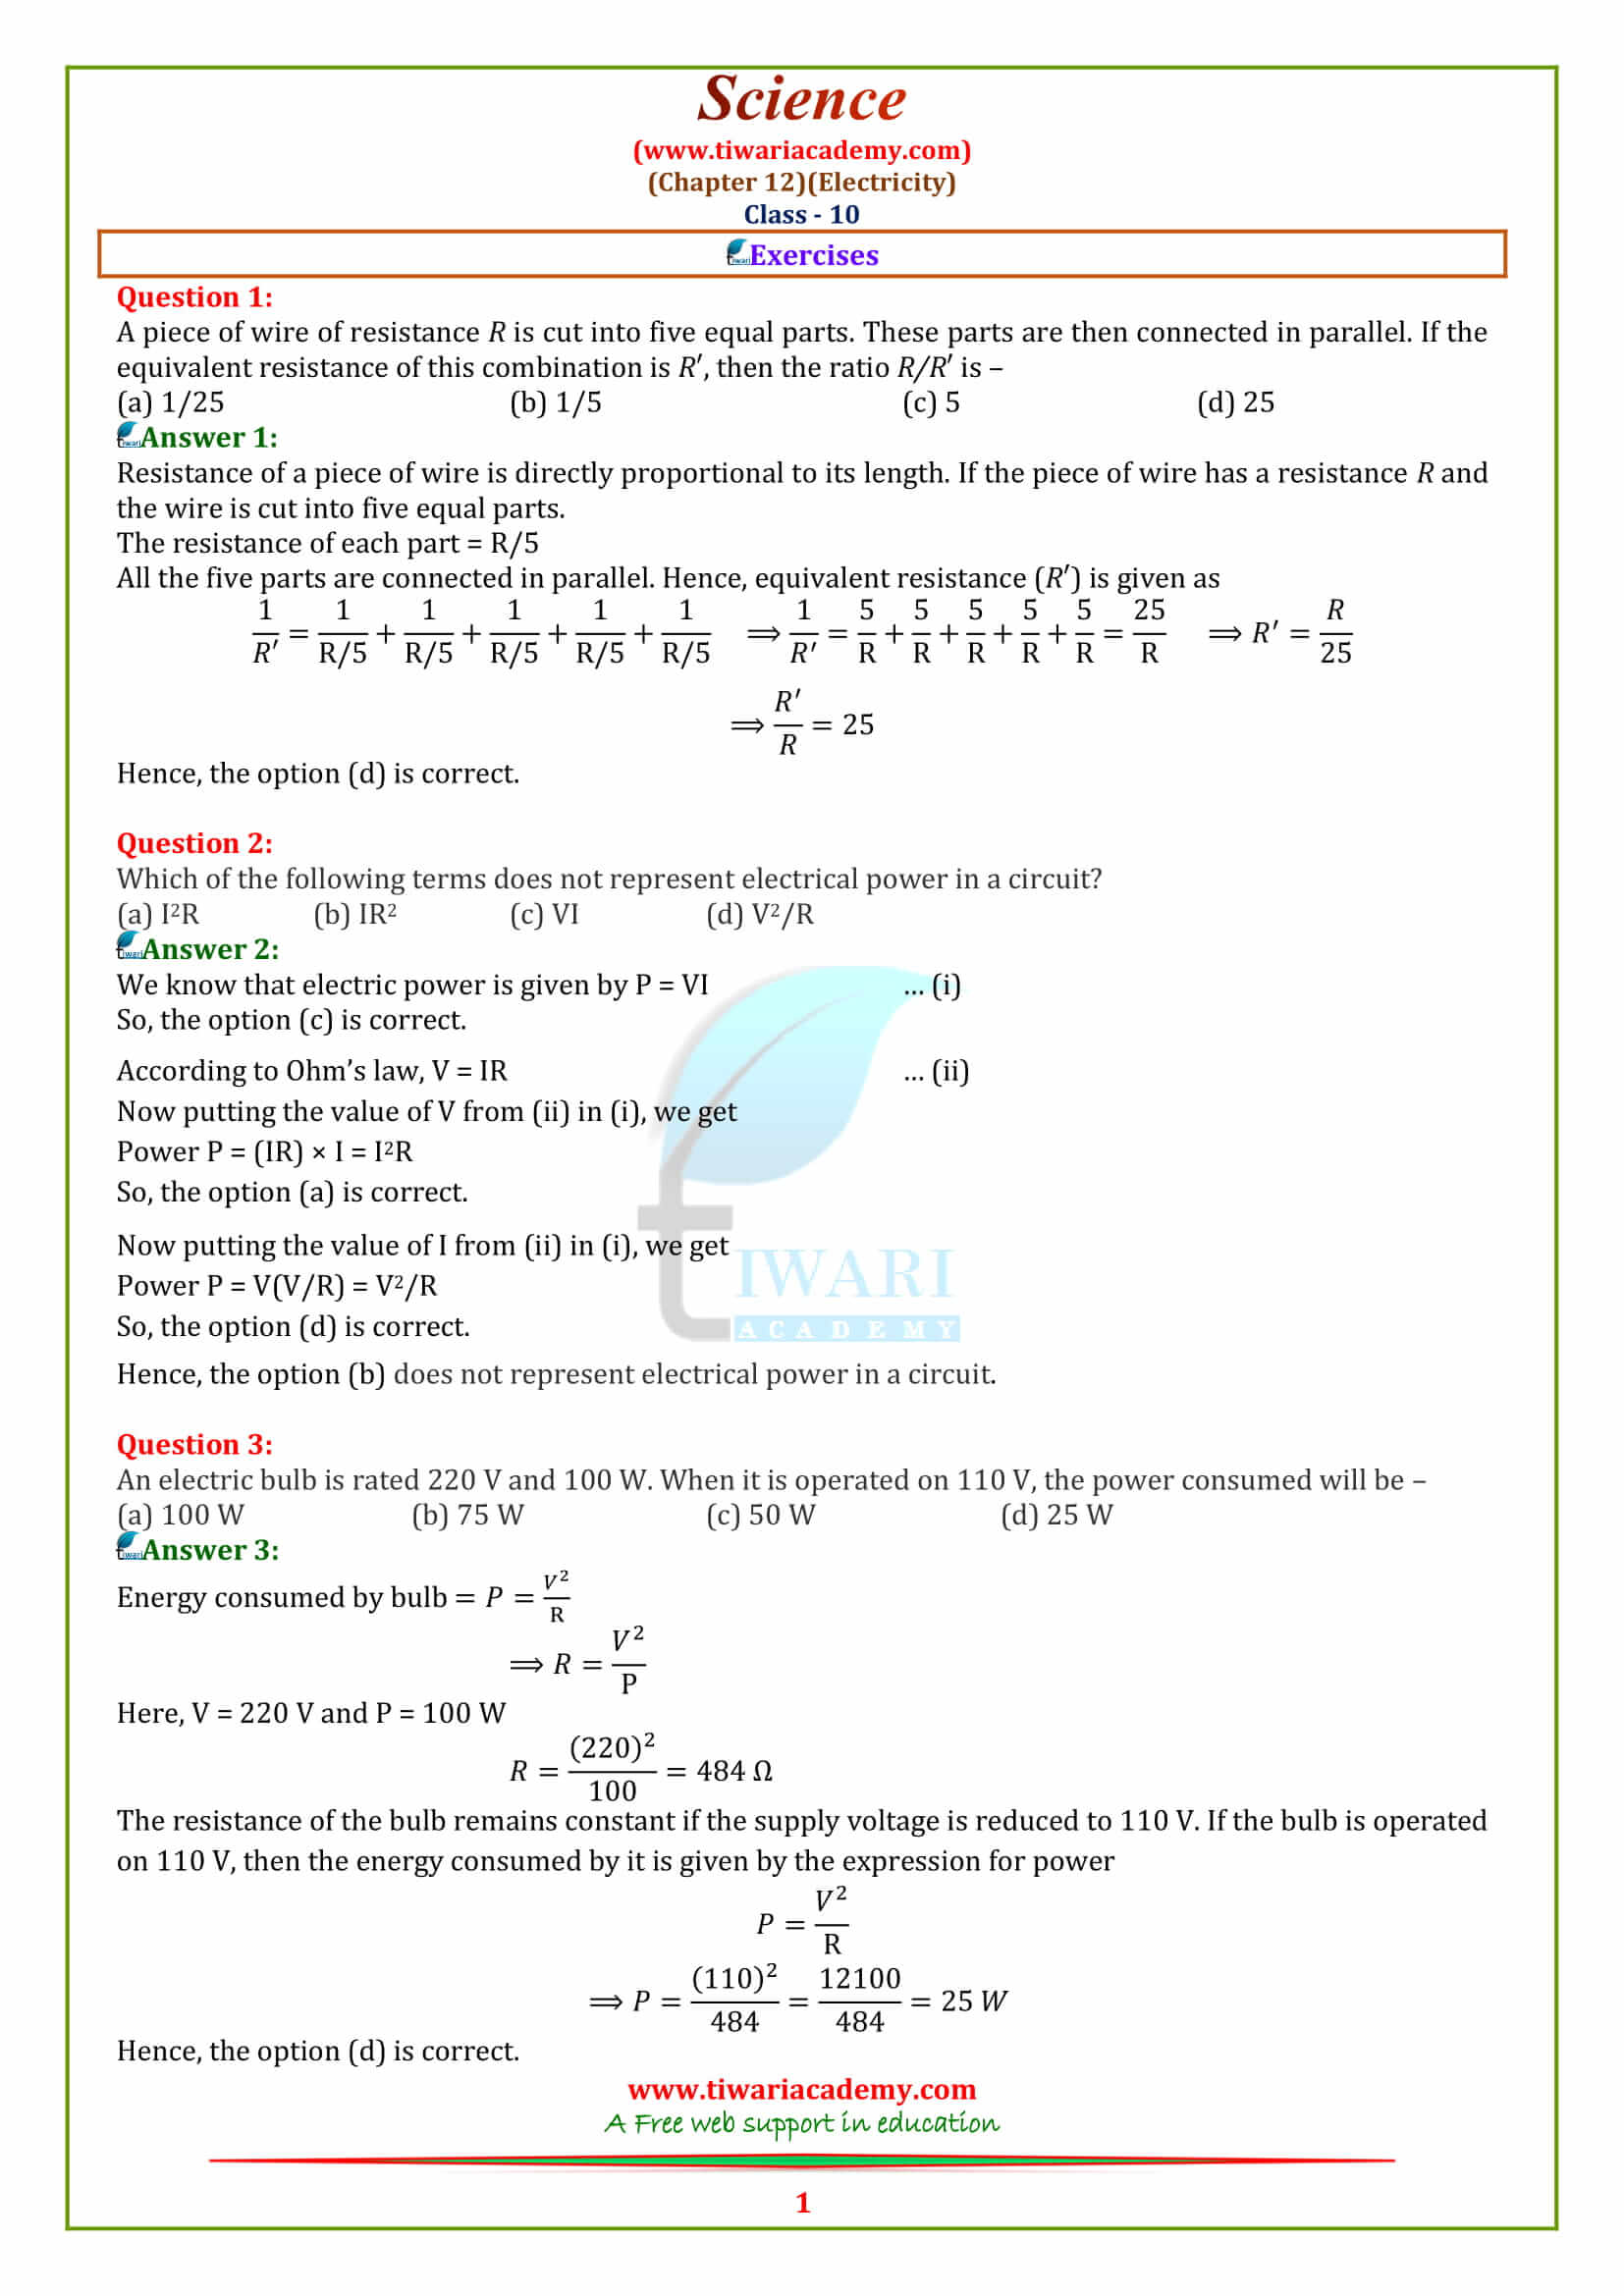 NCERT Solutions for Class 10 Science Chapter 12 Electricity Exercises Question answers